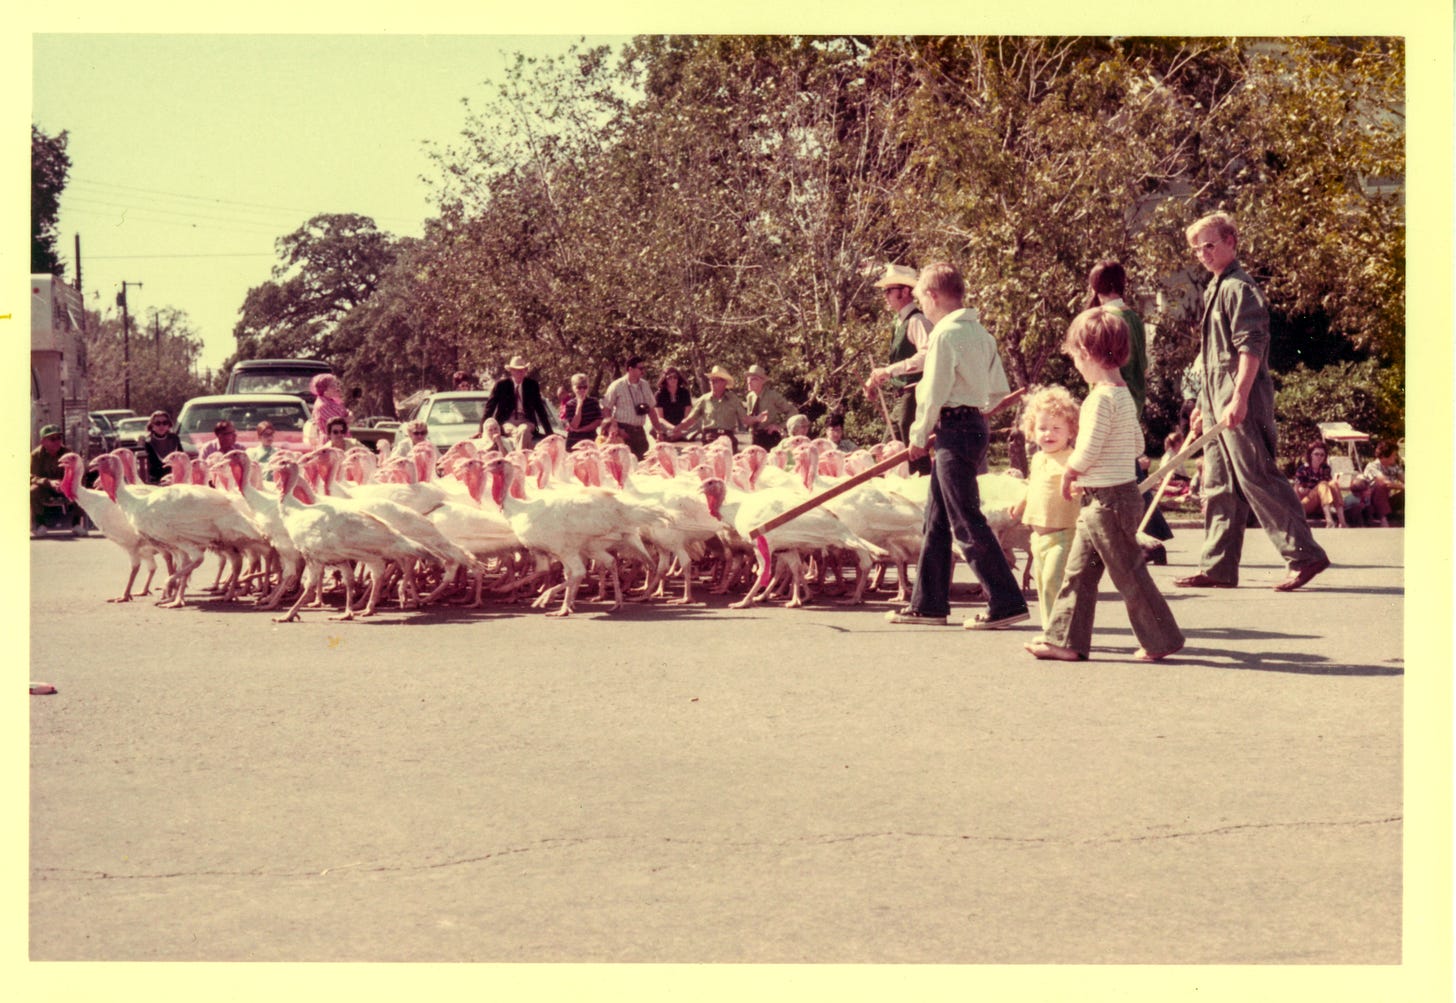 A flock of white turkeys are herded across a street, past parked cars and onlookers. A small boy and girl are in the foreground, walking beside the turkeys